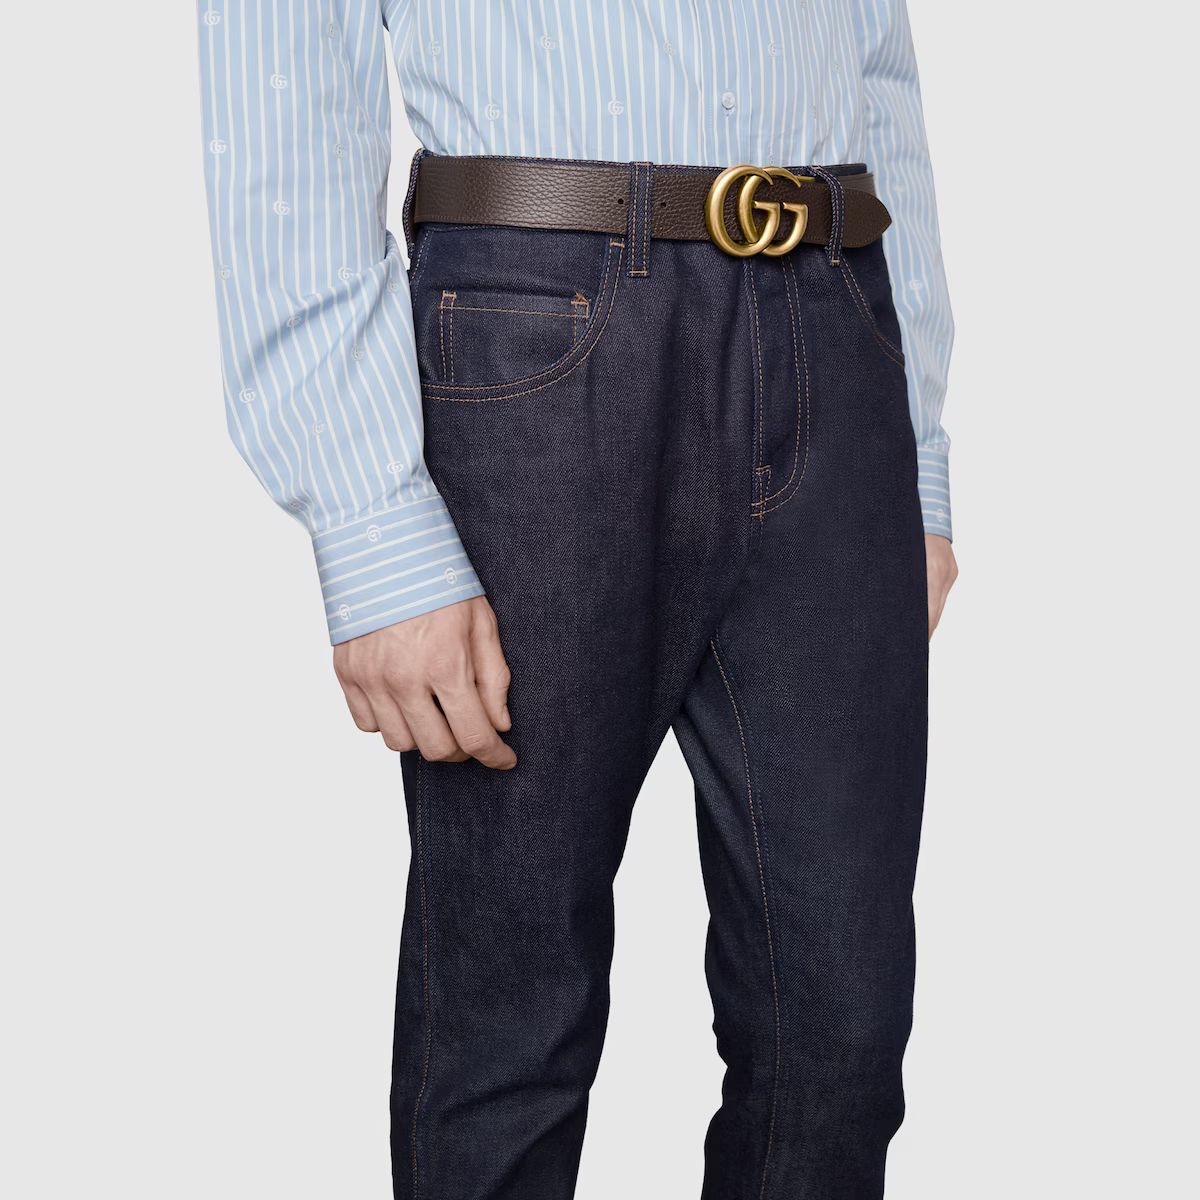 Reversible leather belt with Double G buckle | Gucci (US)